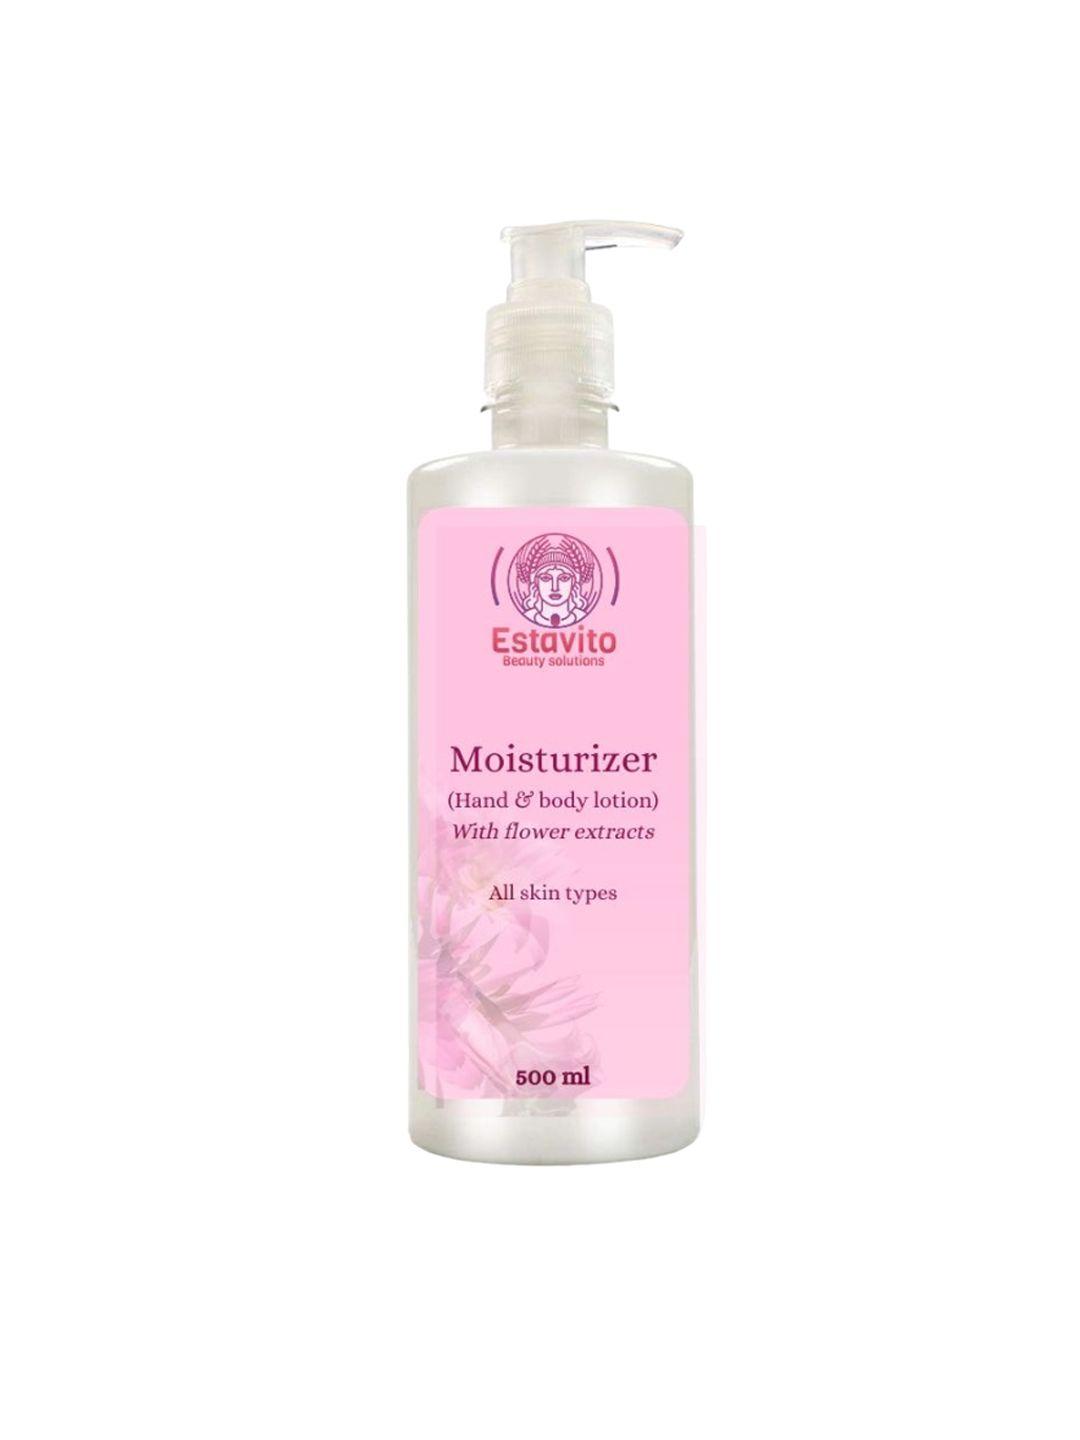 estavito beauty solutions flower extracts hand & body lotion - 500ml